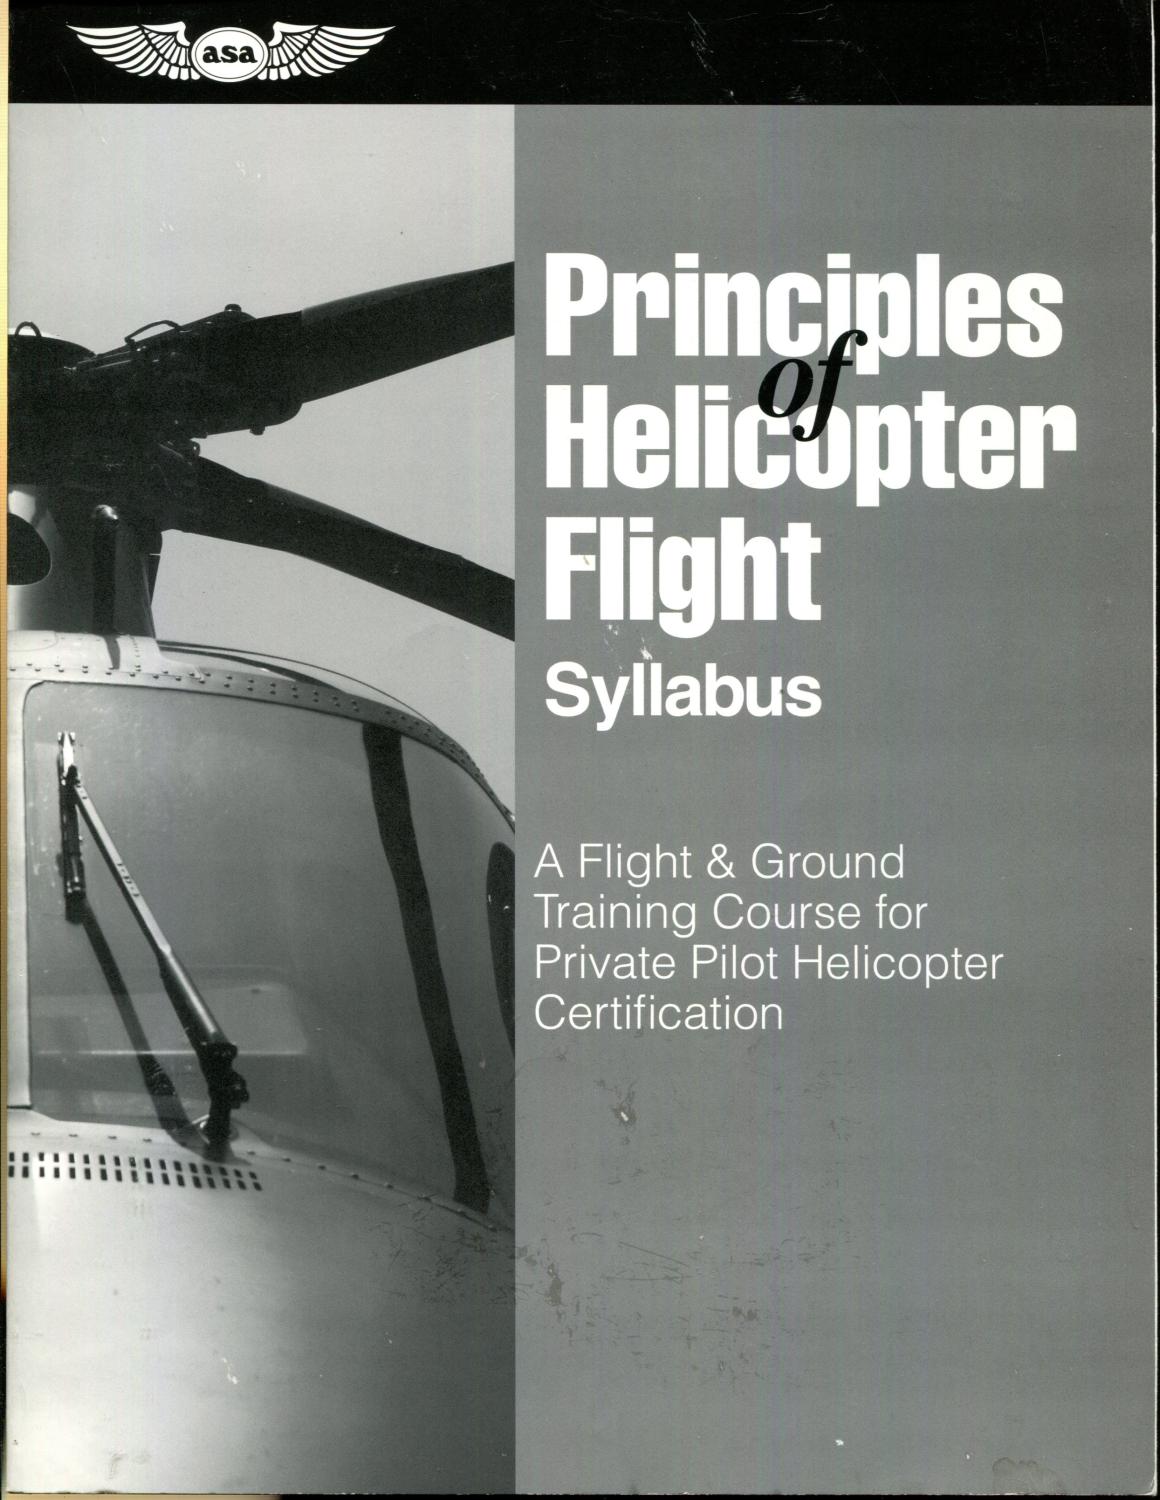 Principles of Helicopter Flight Syllabus: A Flight & Ground Training Course for Private Pilot Helicopter Certification